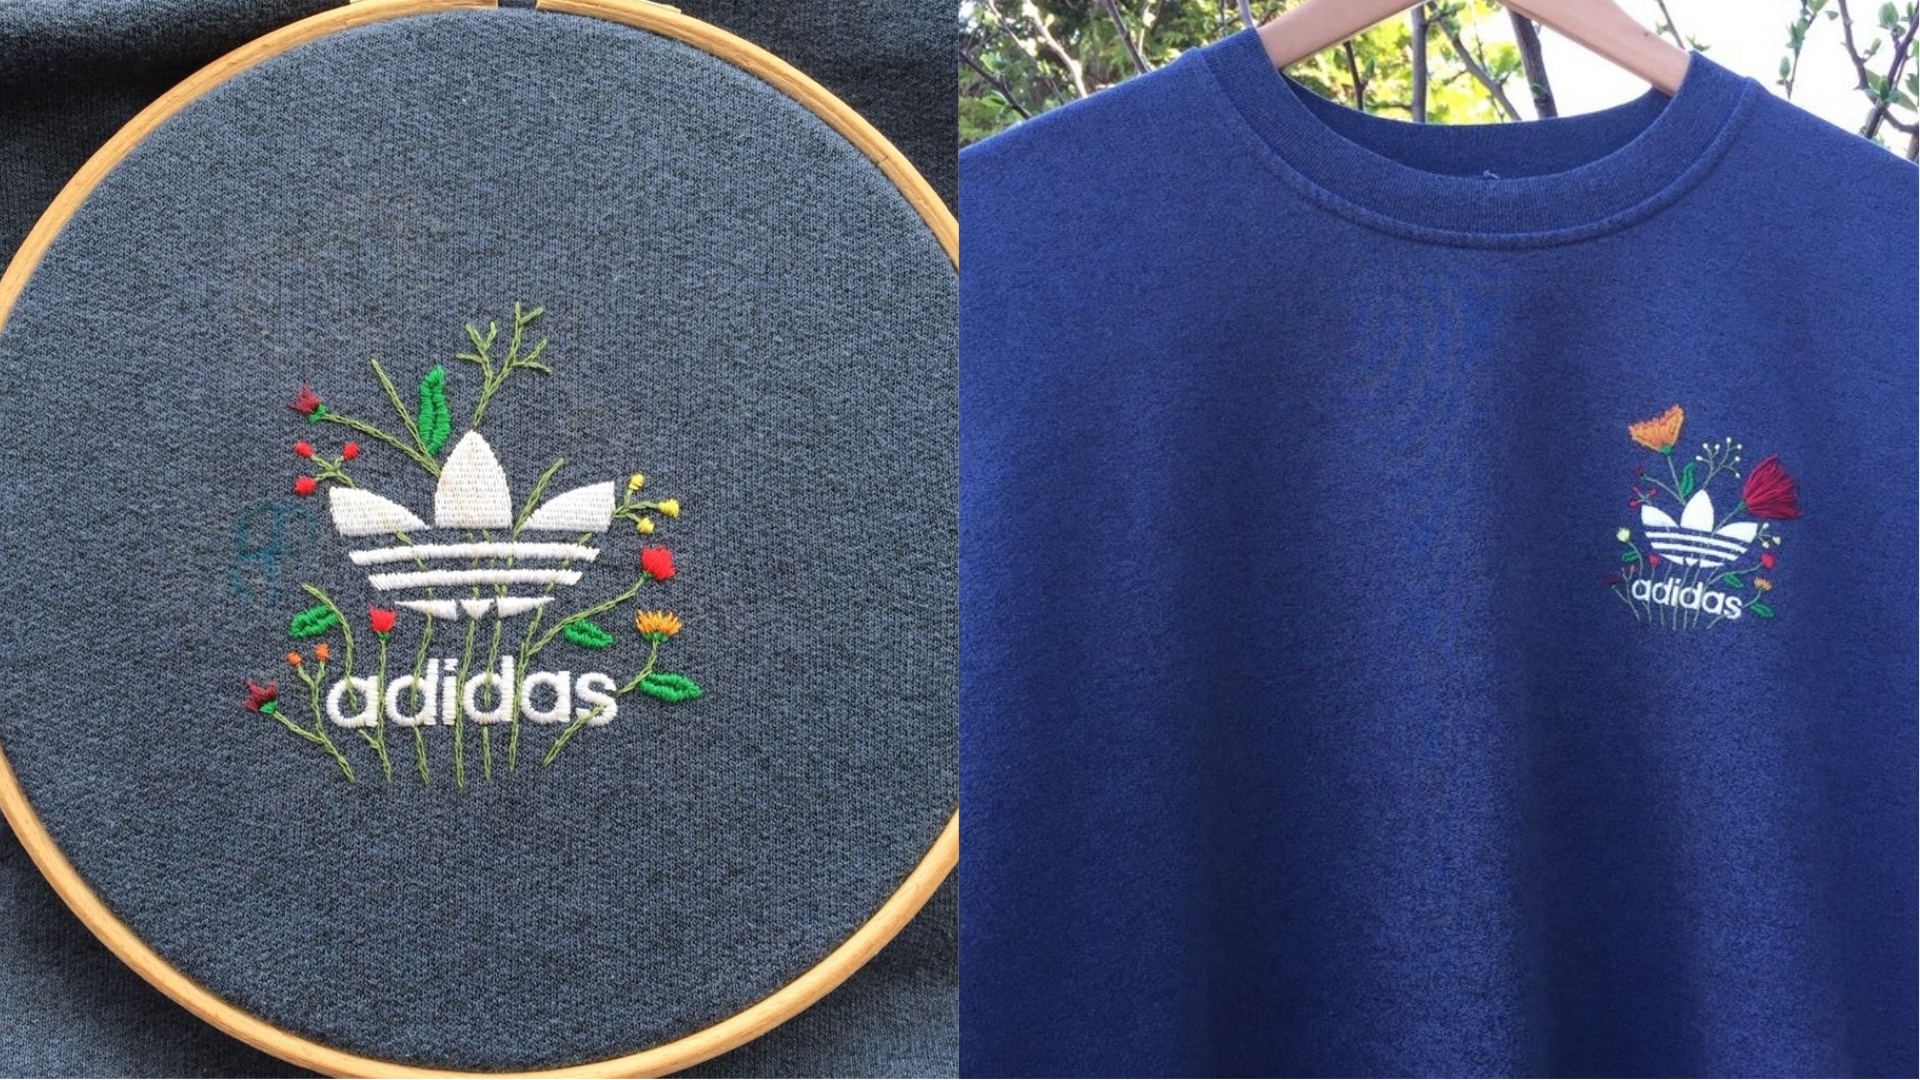 A floral embroidered adidas logo